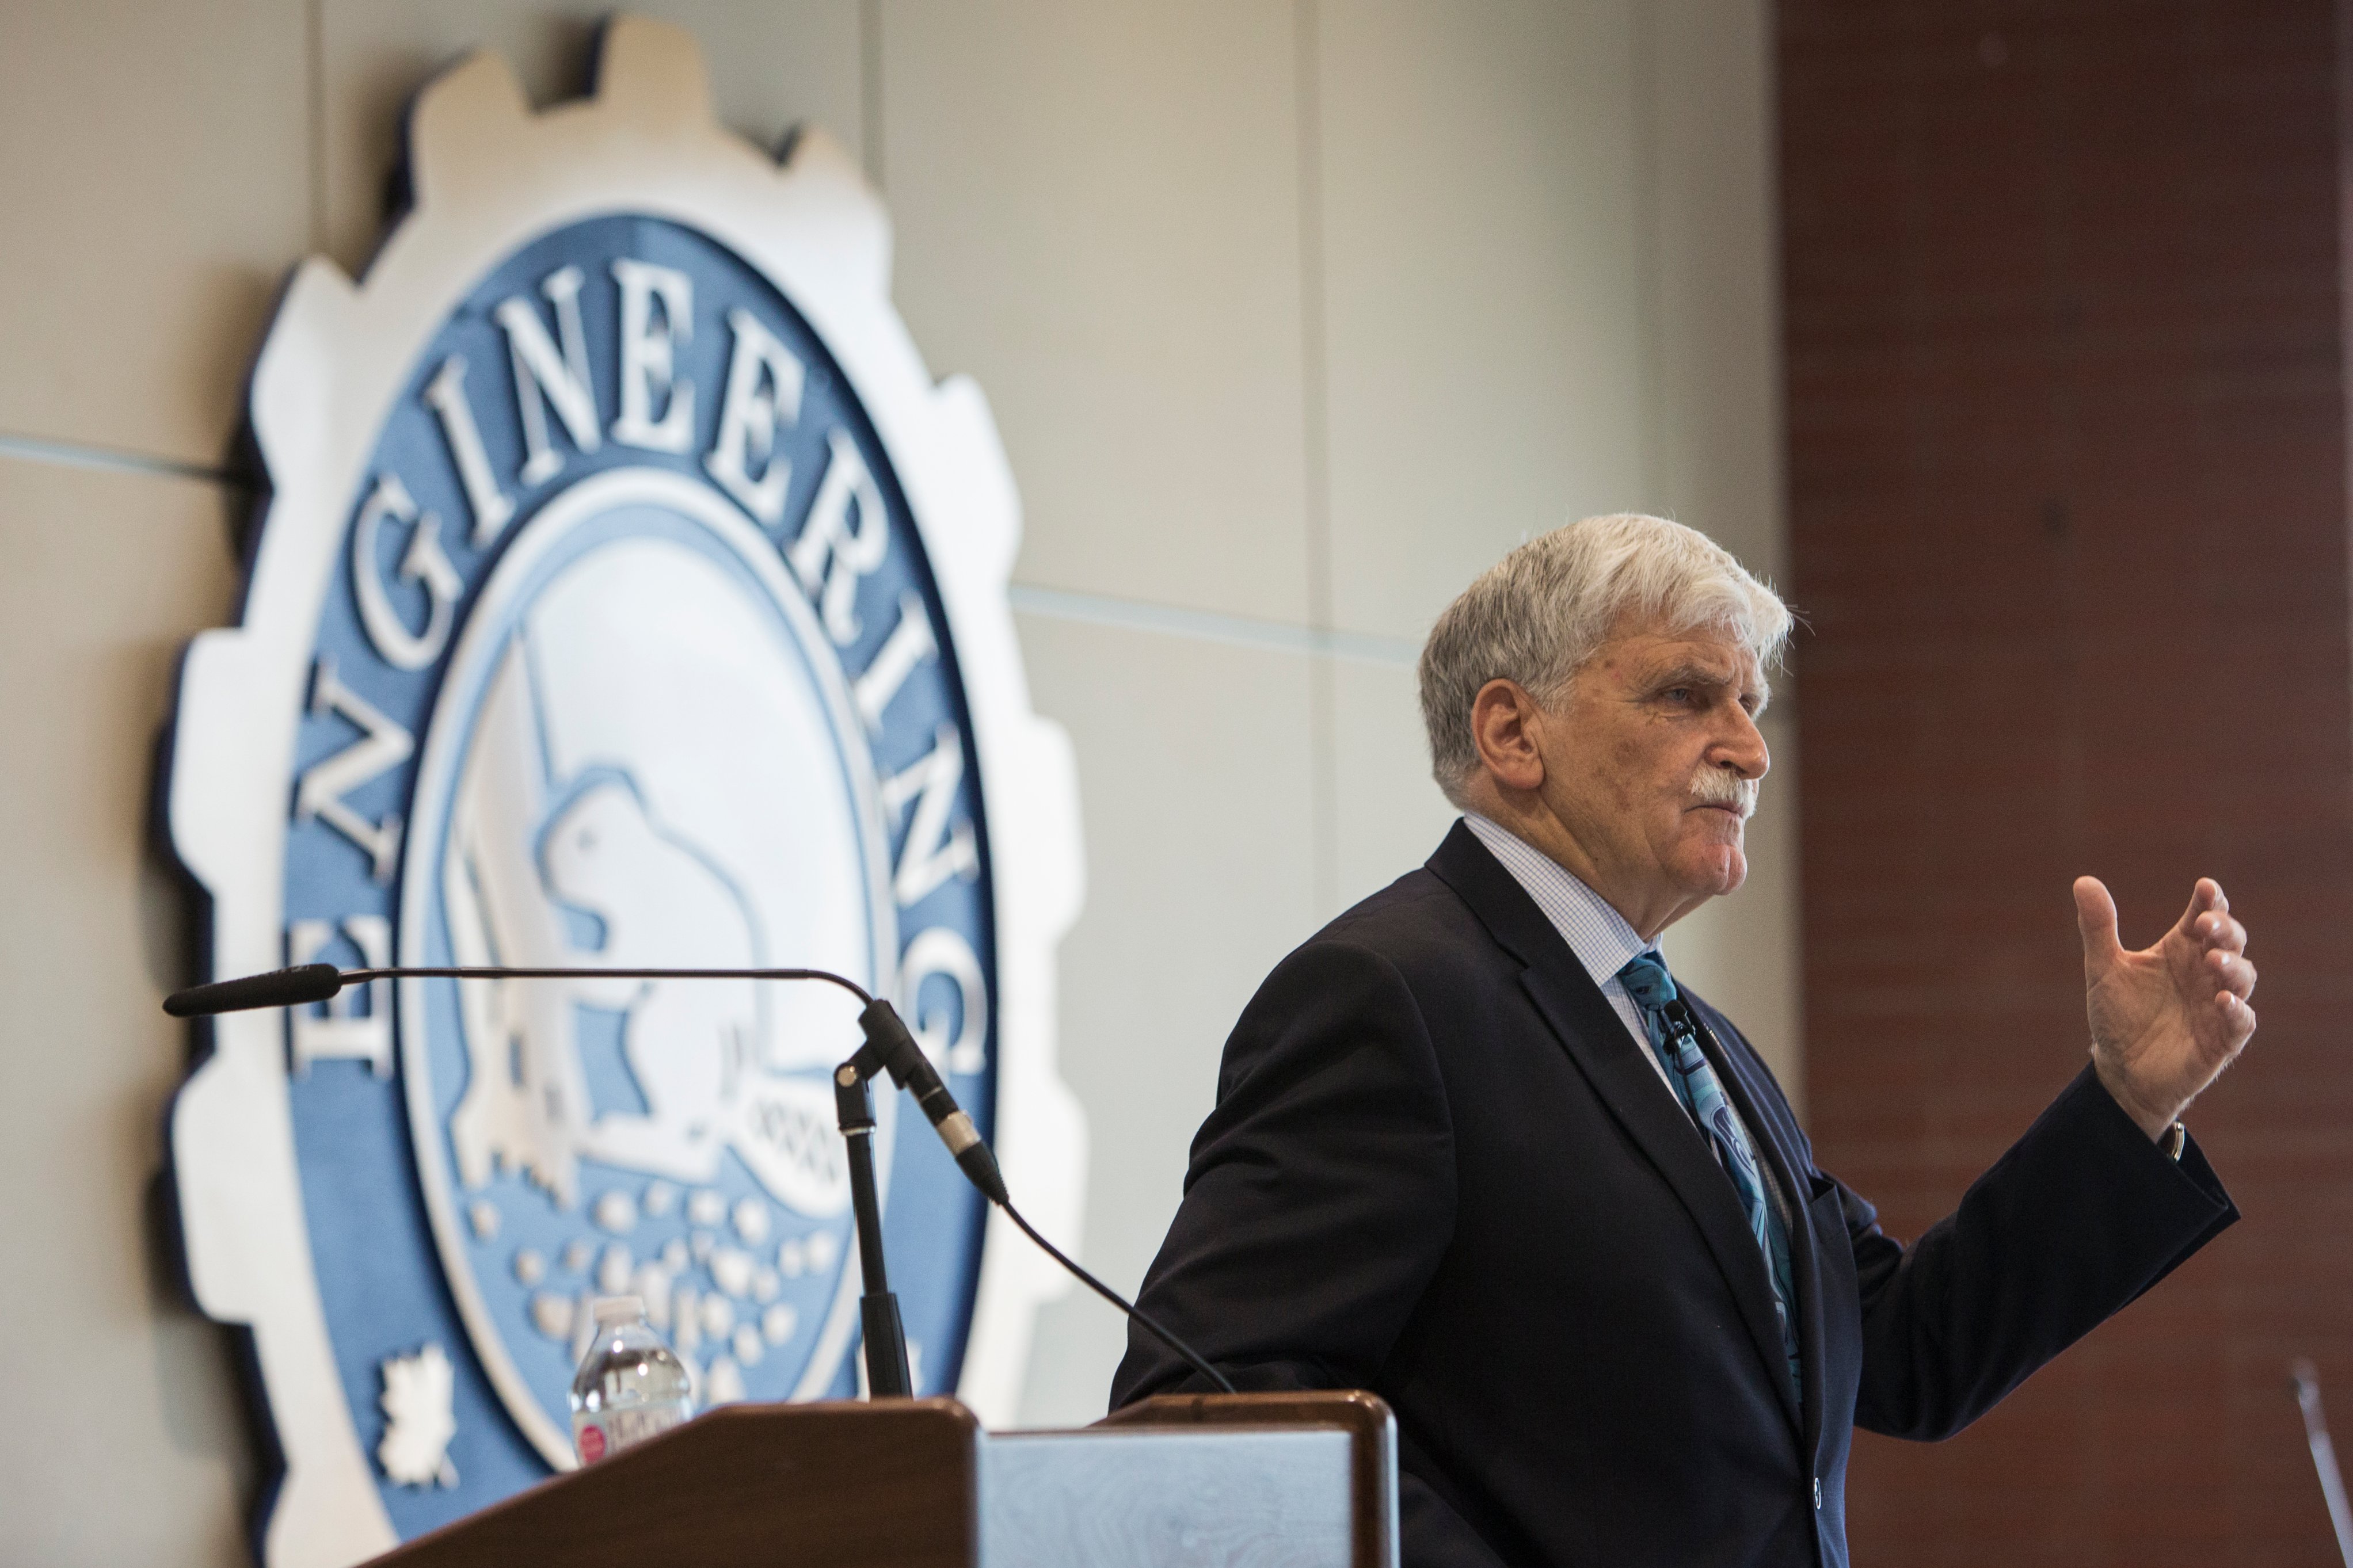 The Honourable Lieutenant-General Romeo Dallaire (Ret.) addressed engineering students and faculty members and university leaders, focusing on the job of developing ethical leaders. Photo: Amber Bracken